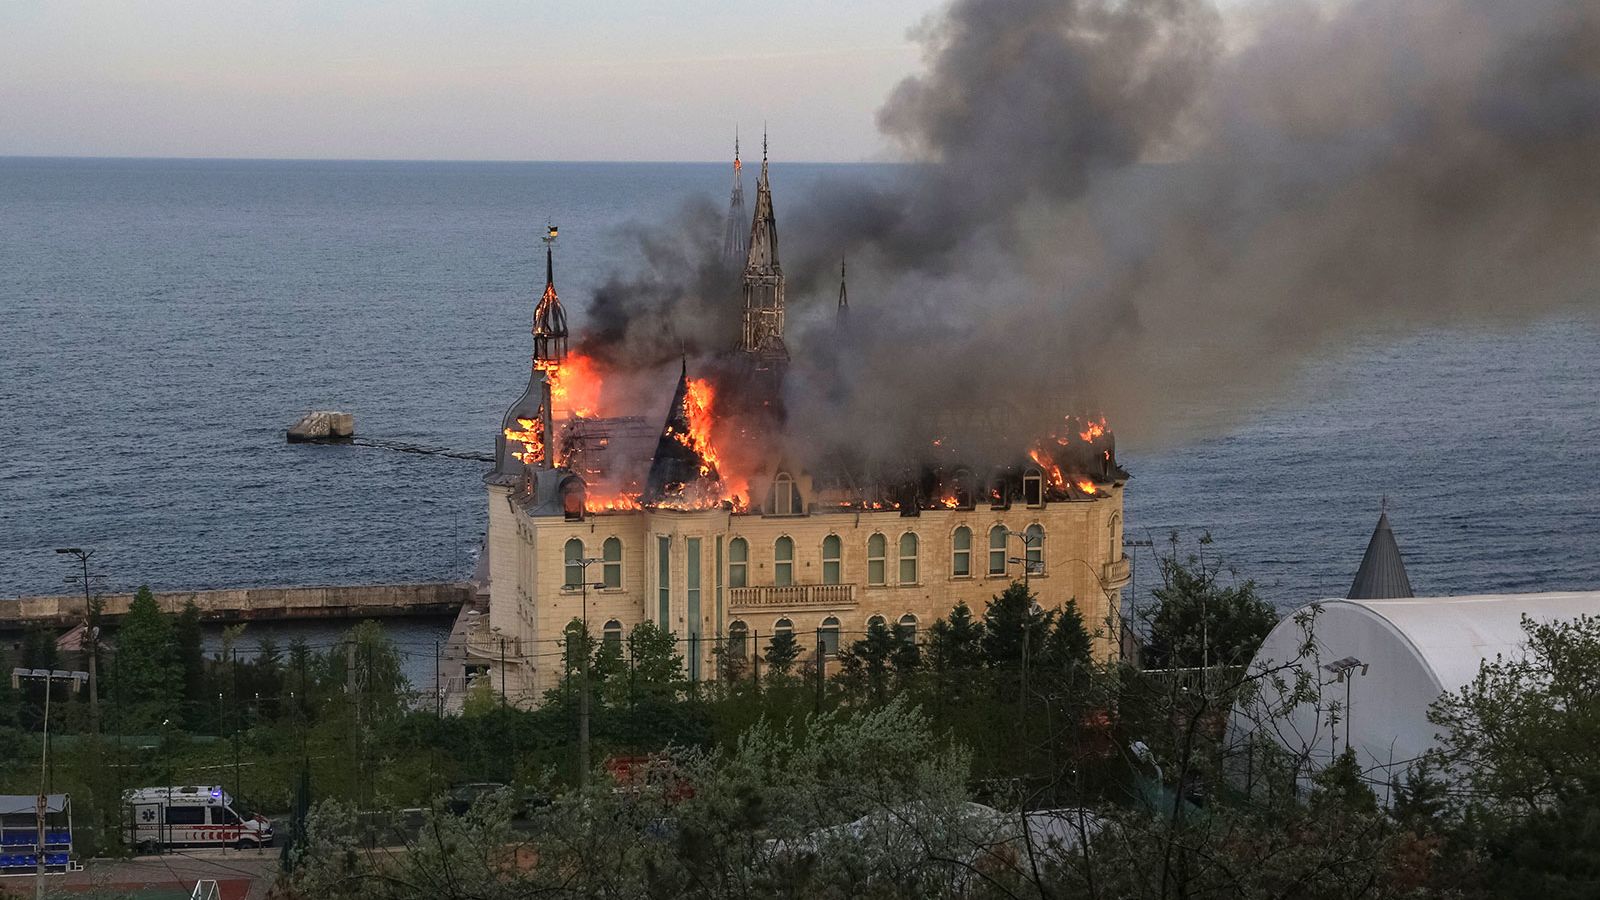 An educational institution known as 'Harry Potter castle' burns after a Russian missile strike in Odesa, Ukraine, on April 29.